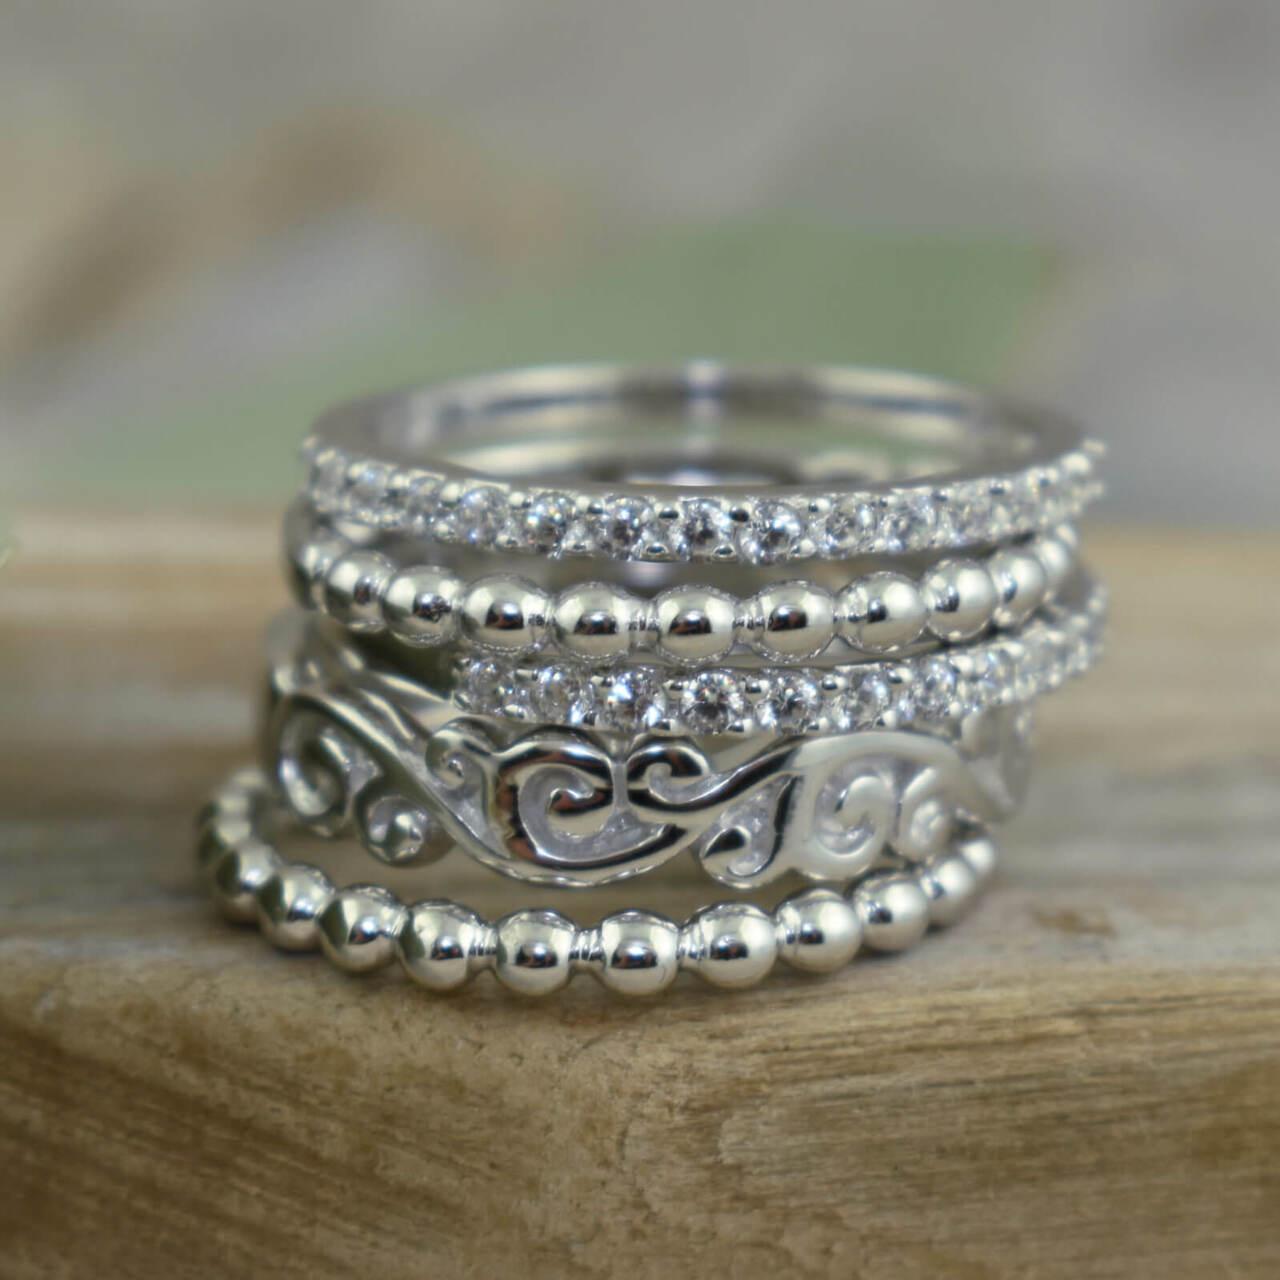 Handcrafted sterling silver and CZ stack rings